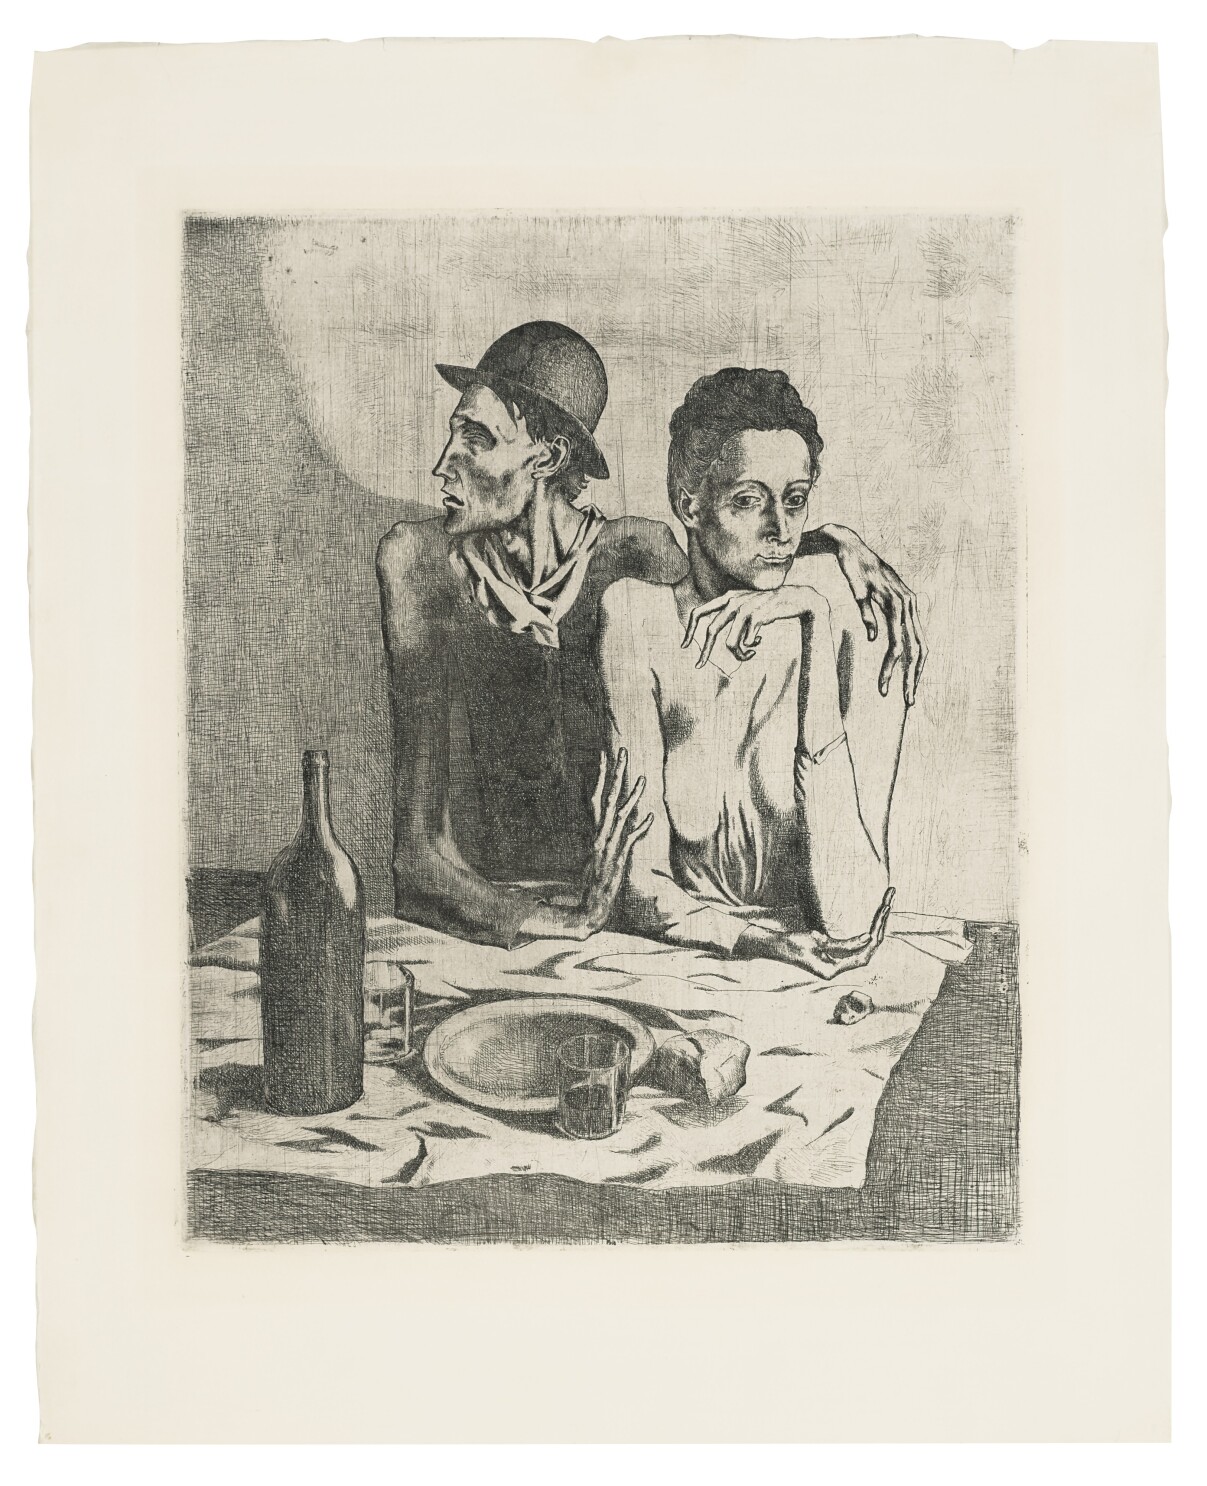 Pablo Picasso S The Frugal Meal Among Prints Up For Auction To Help Feed Orange County Los Angeles Times